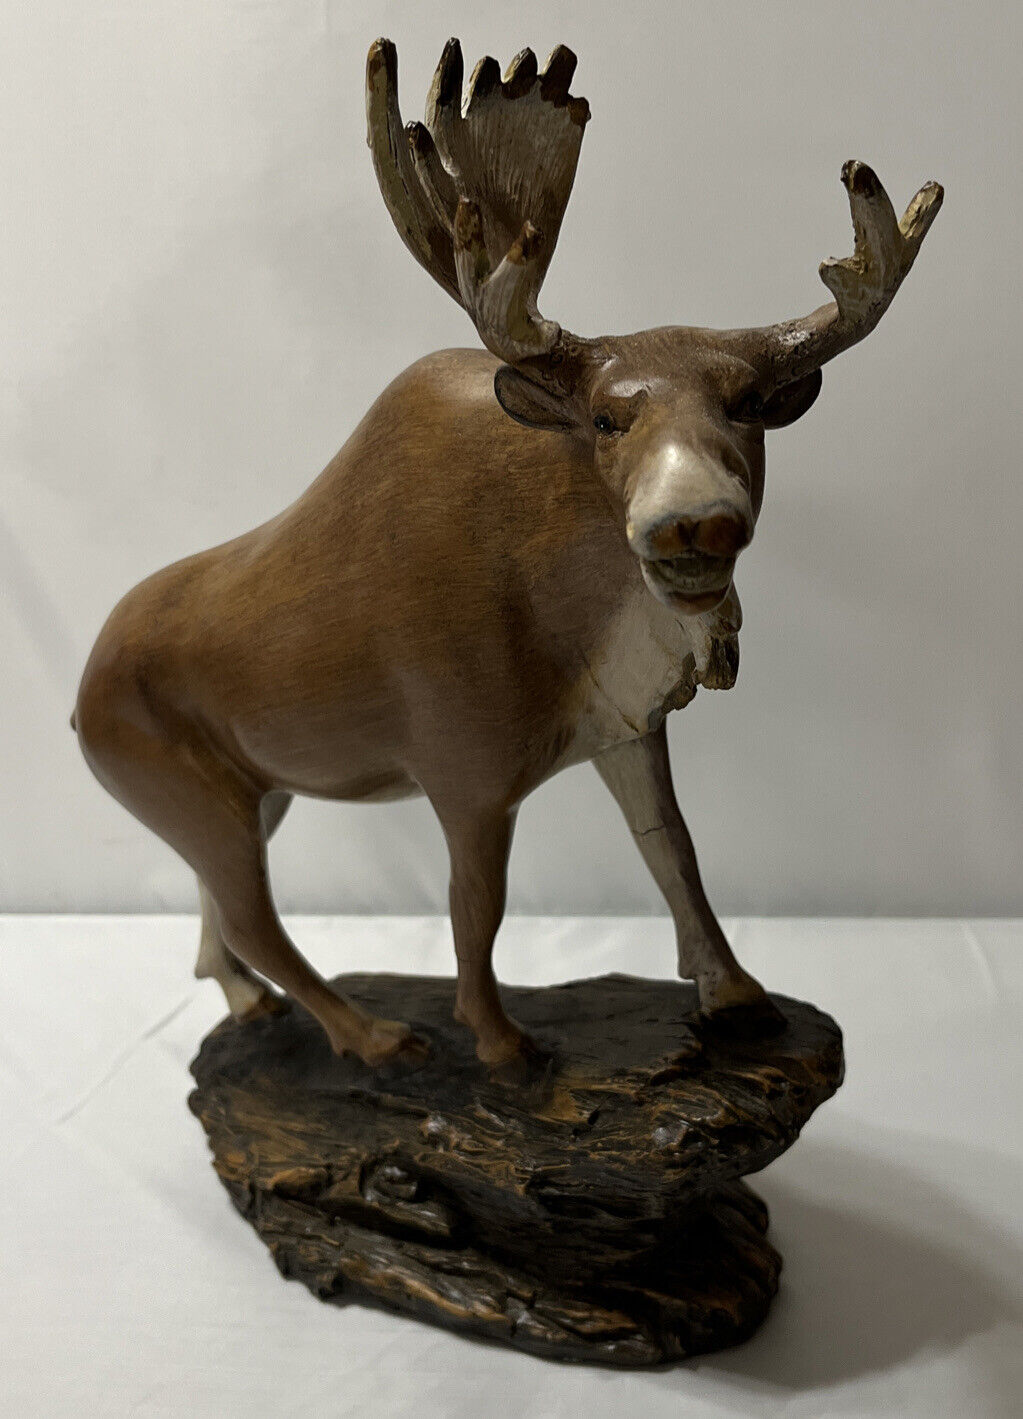 Wild Elk Bull Moose Statue Figurine With Wood Base.  Outdoors Mountains Nature